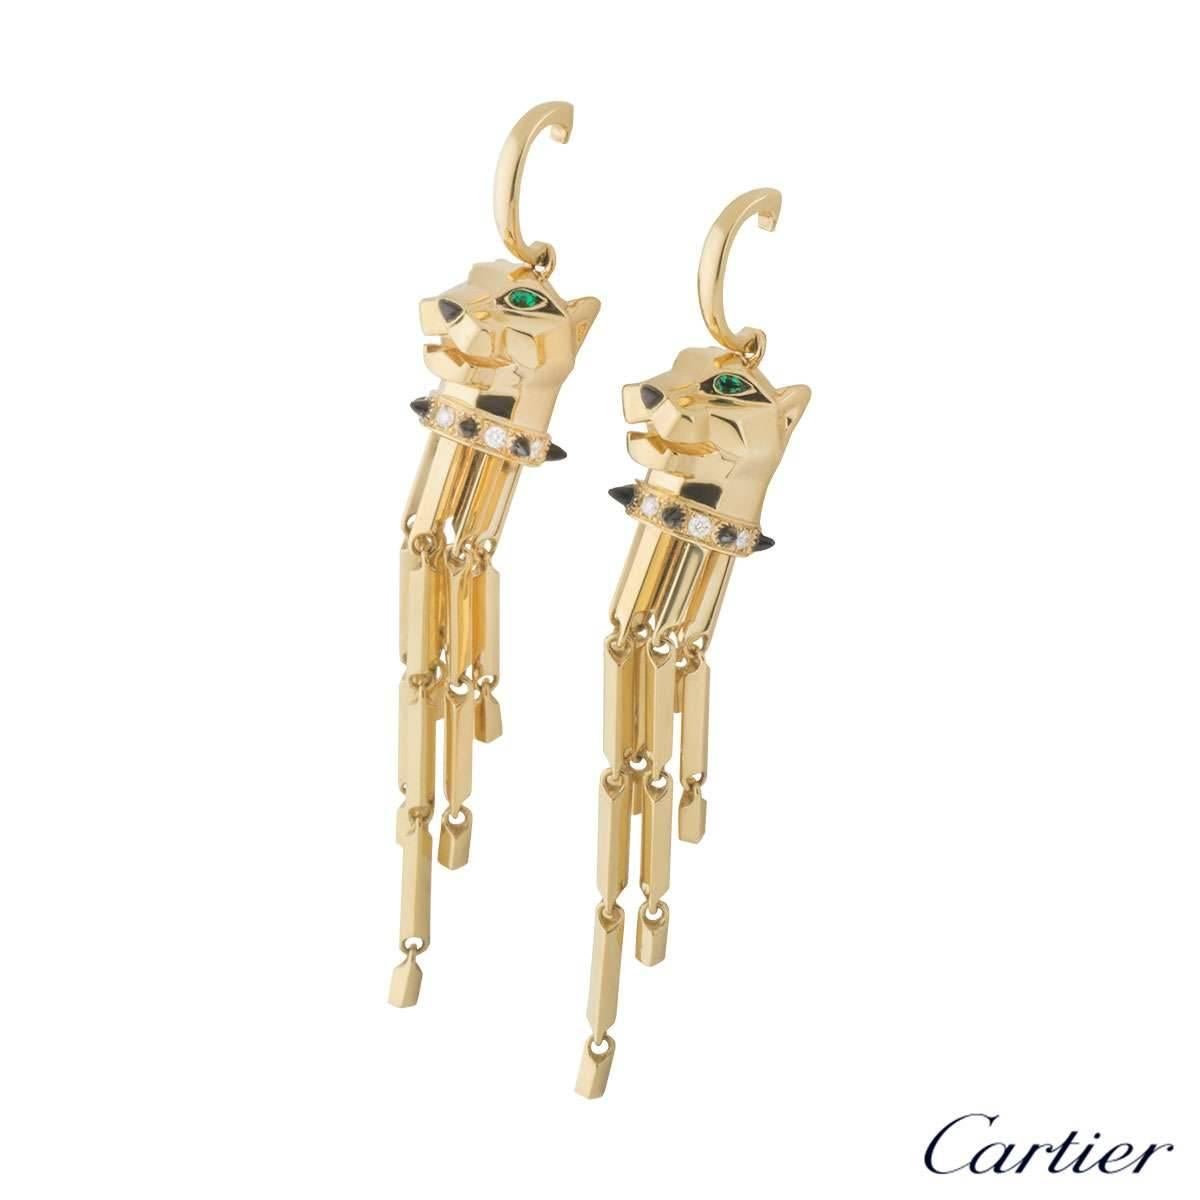 A spectacular pair of 18k yellow gold Cartier earrings from the Panthere de Cartier collection. The earrings comprise of a Panthere's head, with tsavorite set to the eyes and black onyx to the nose, complimented with black lacquer detailing. The